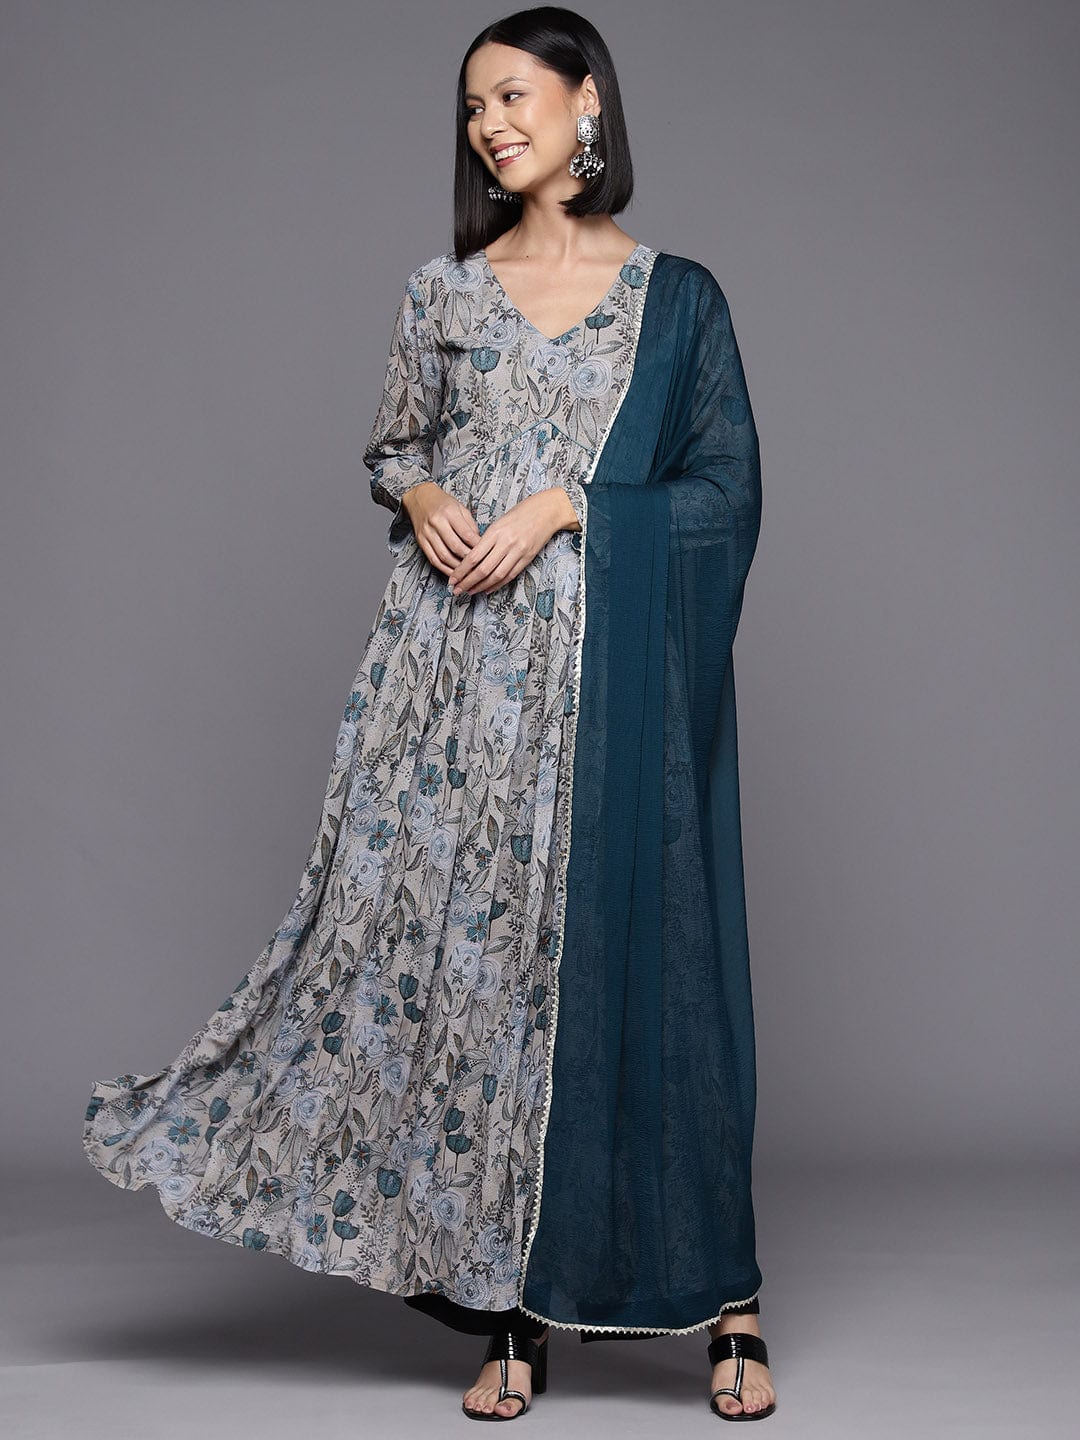 Grey Floral Printed Anarkali Kurta With Full Sleeves Paired With Green Solid Dupatta